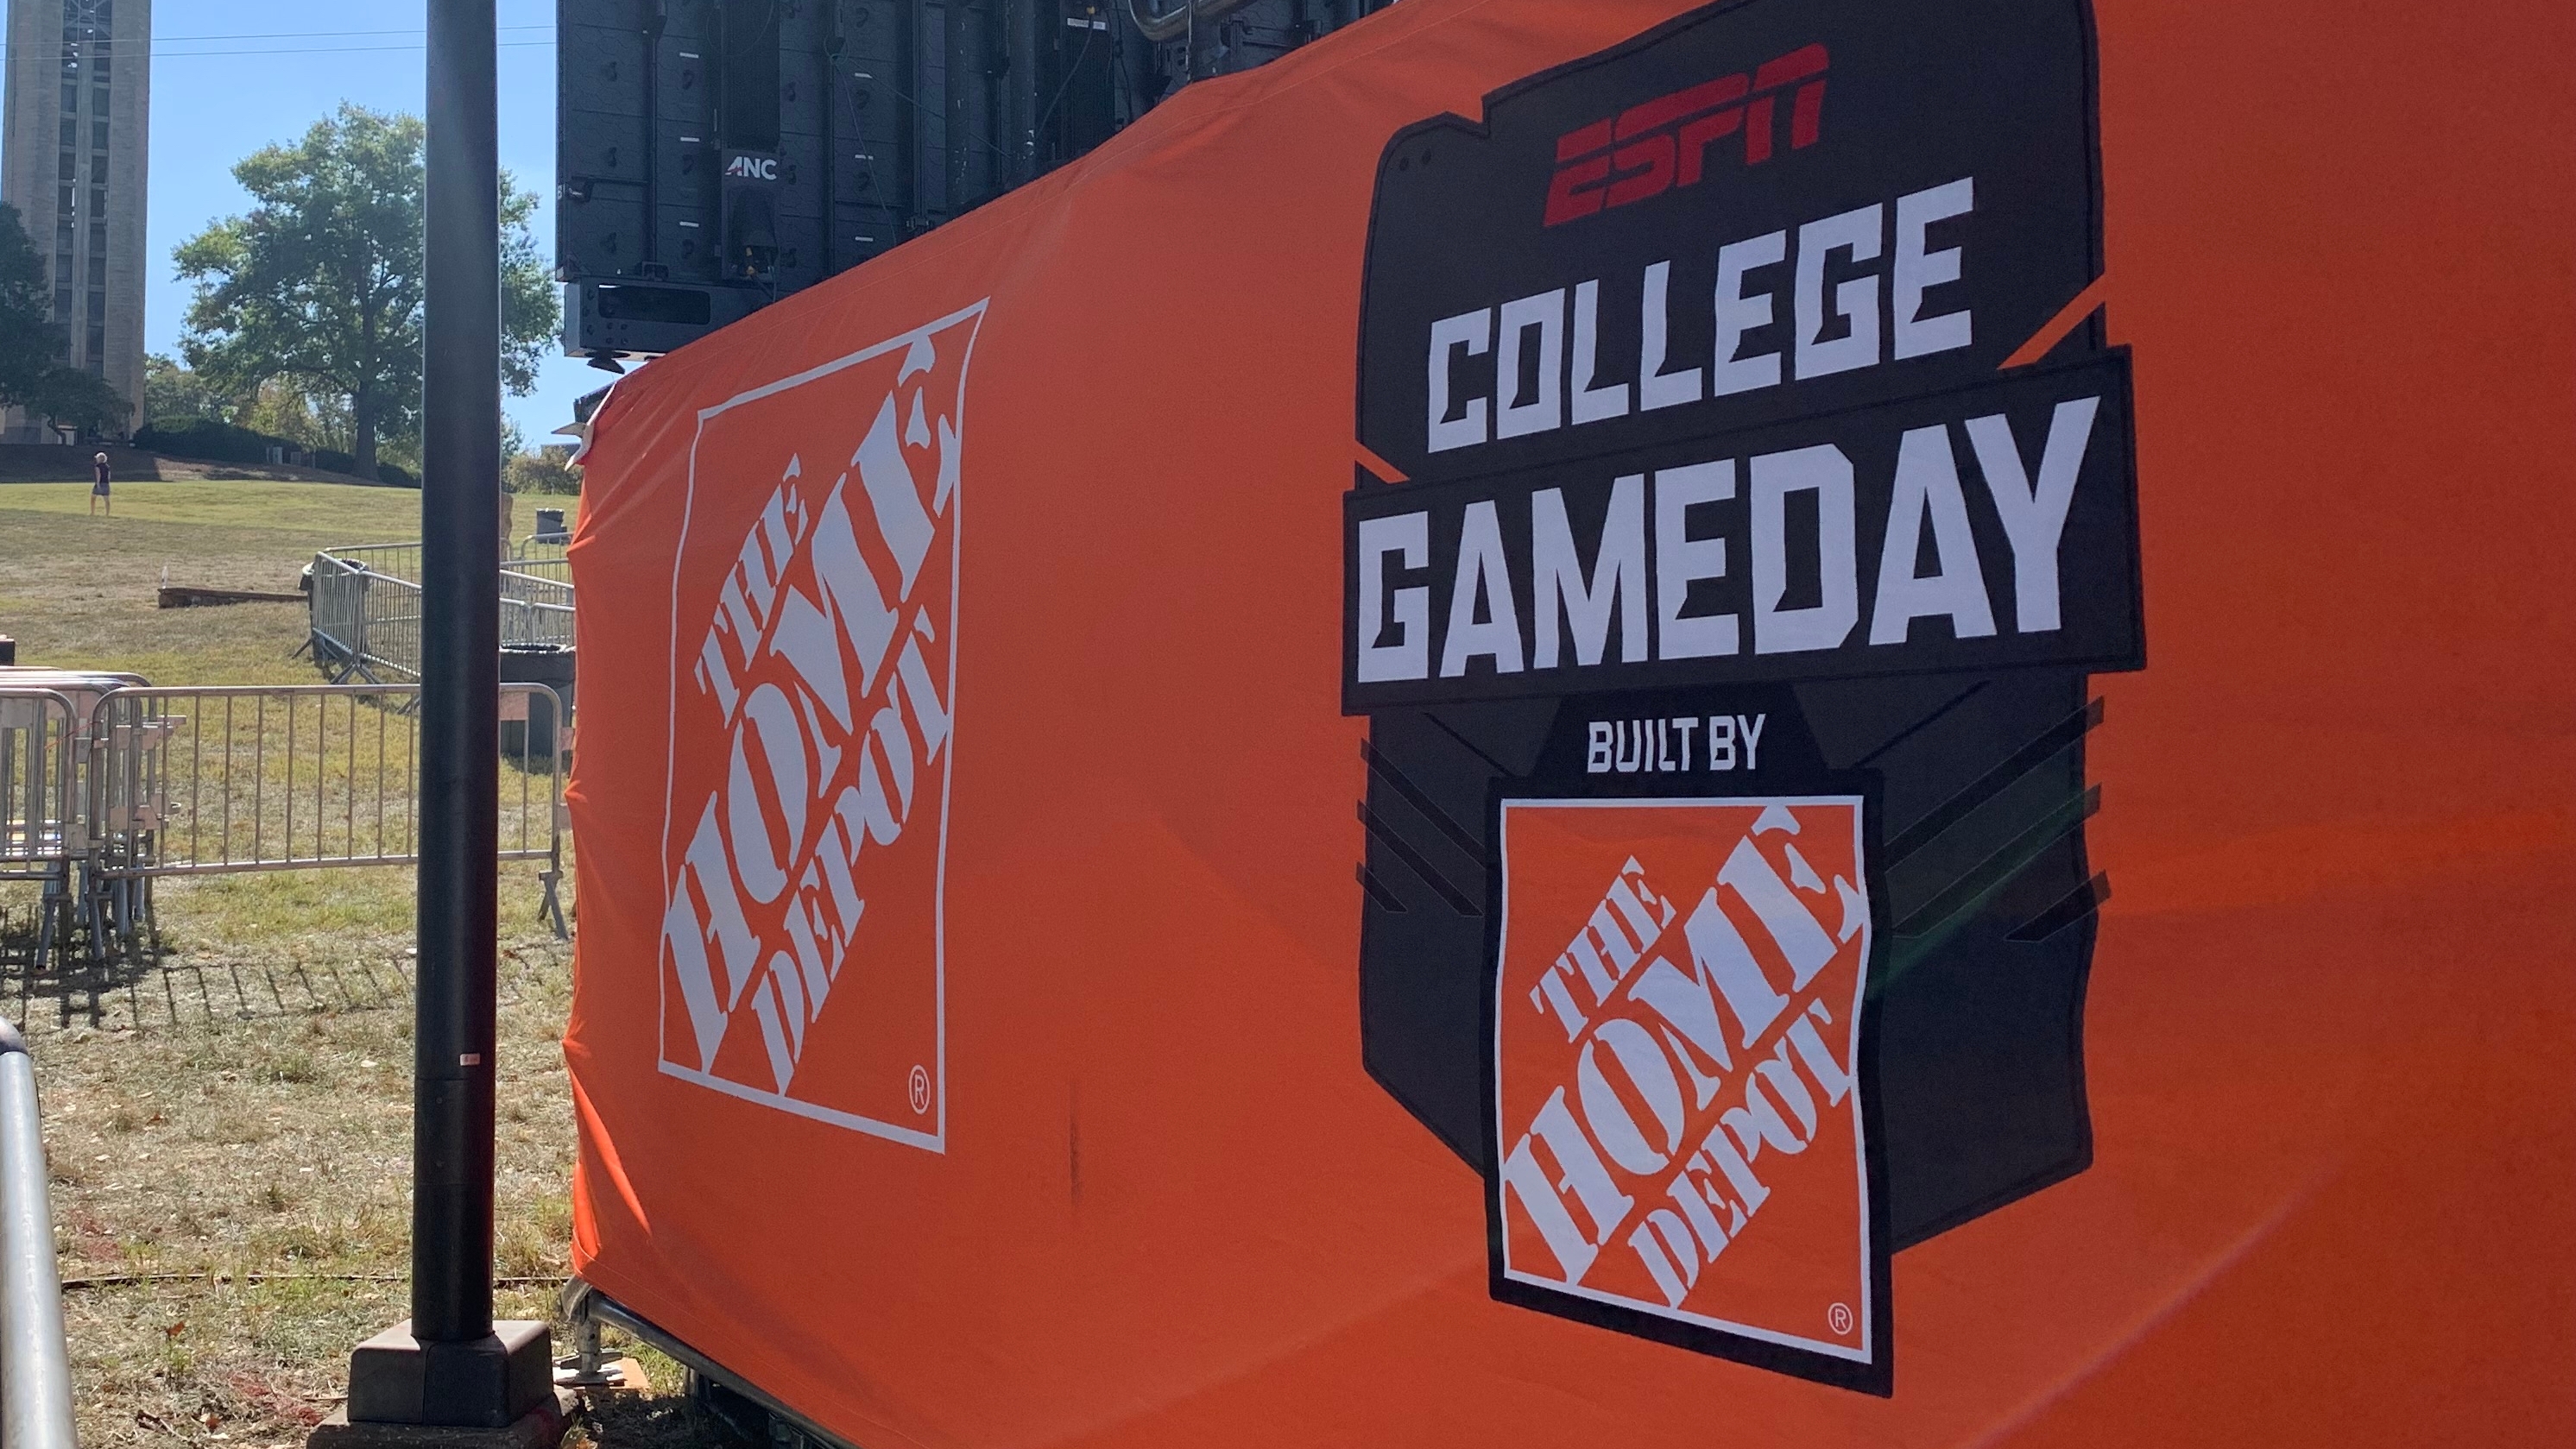 ESPN'S College GameDay Built by The Home Depot Returns for its